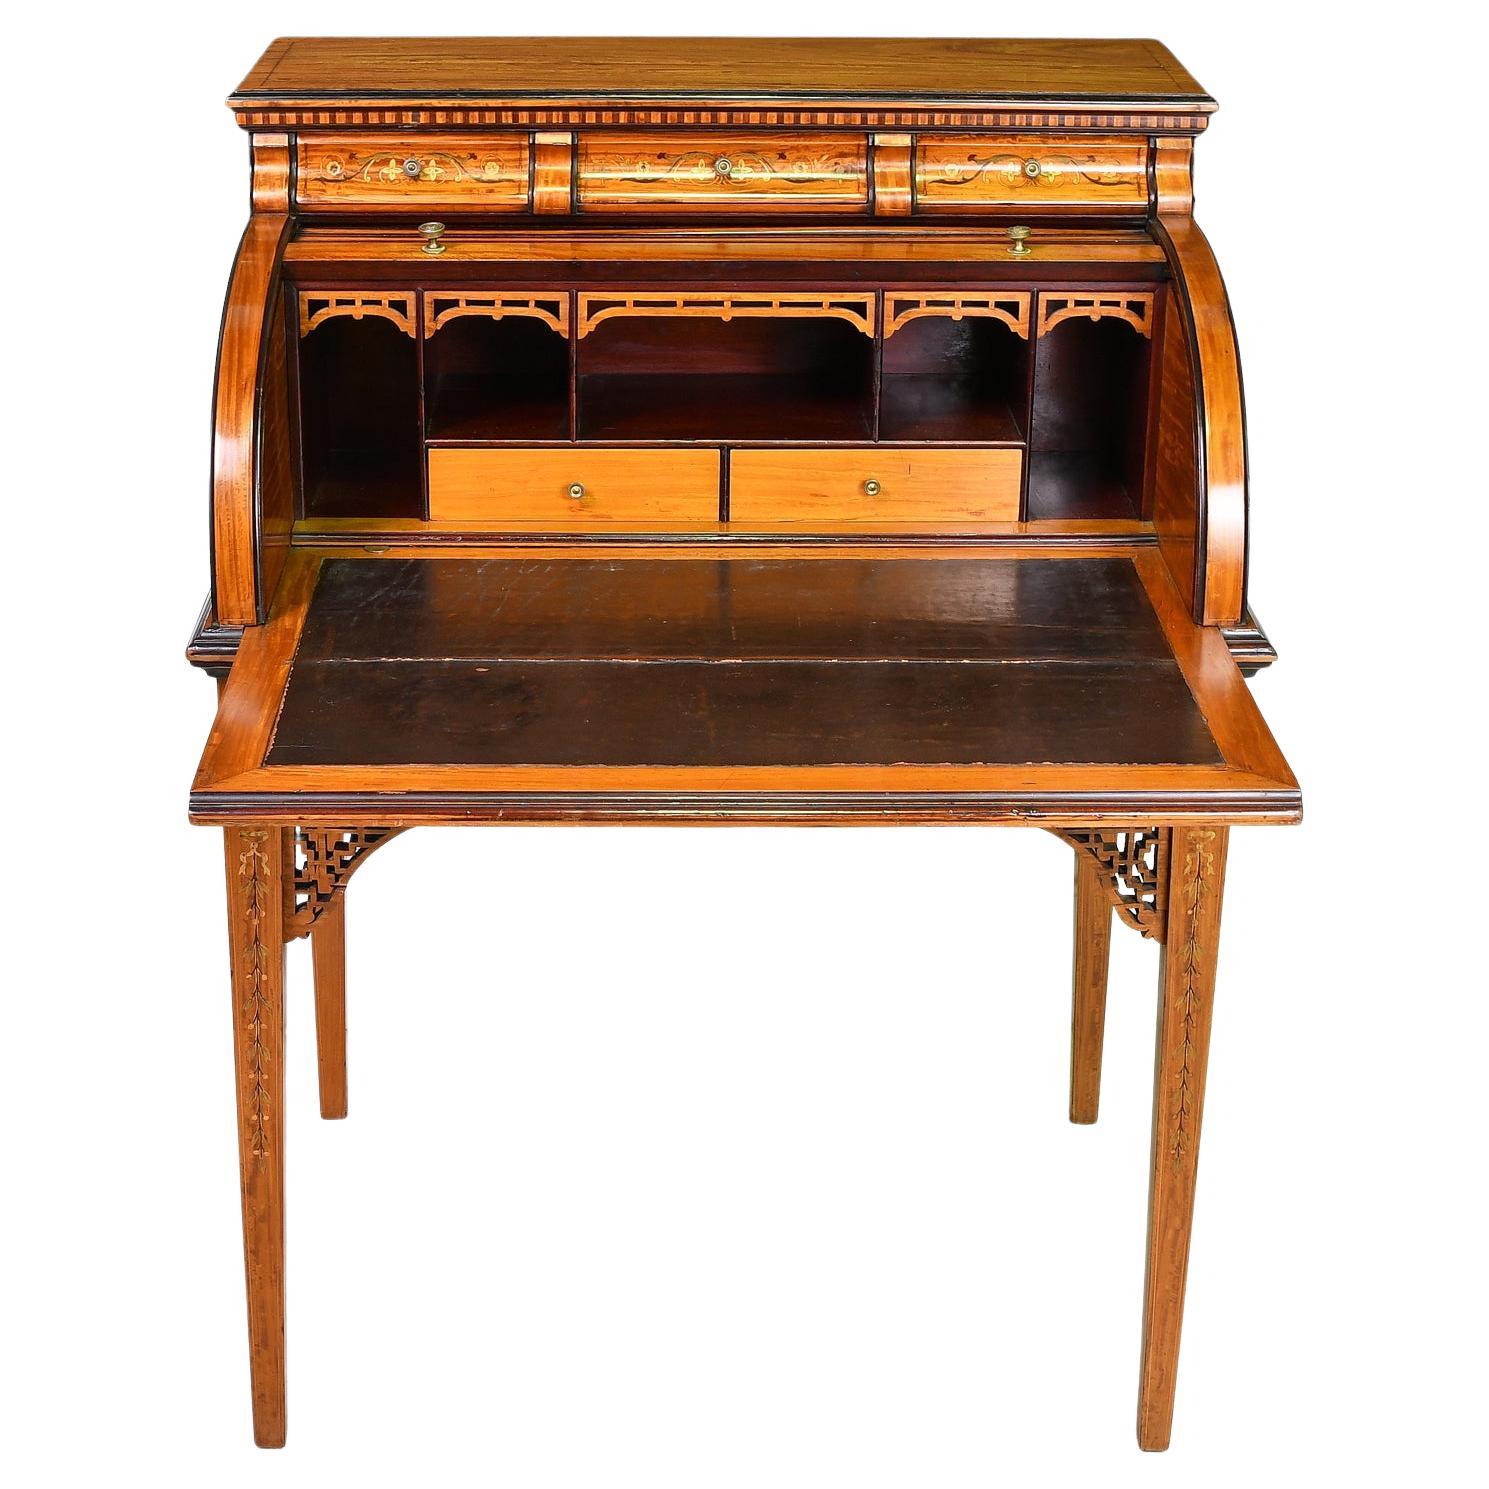 Hand-Crafted American Gilded Age Hepplewhite-Style Writing Desk in Satinwood w/ Marquetry For Sale